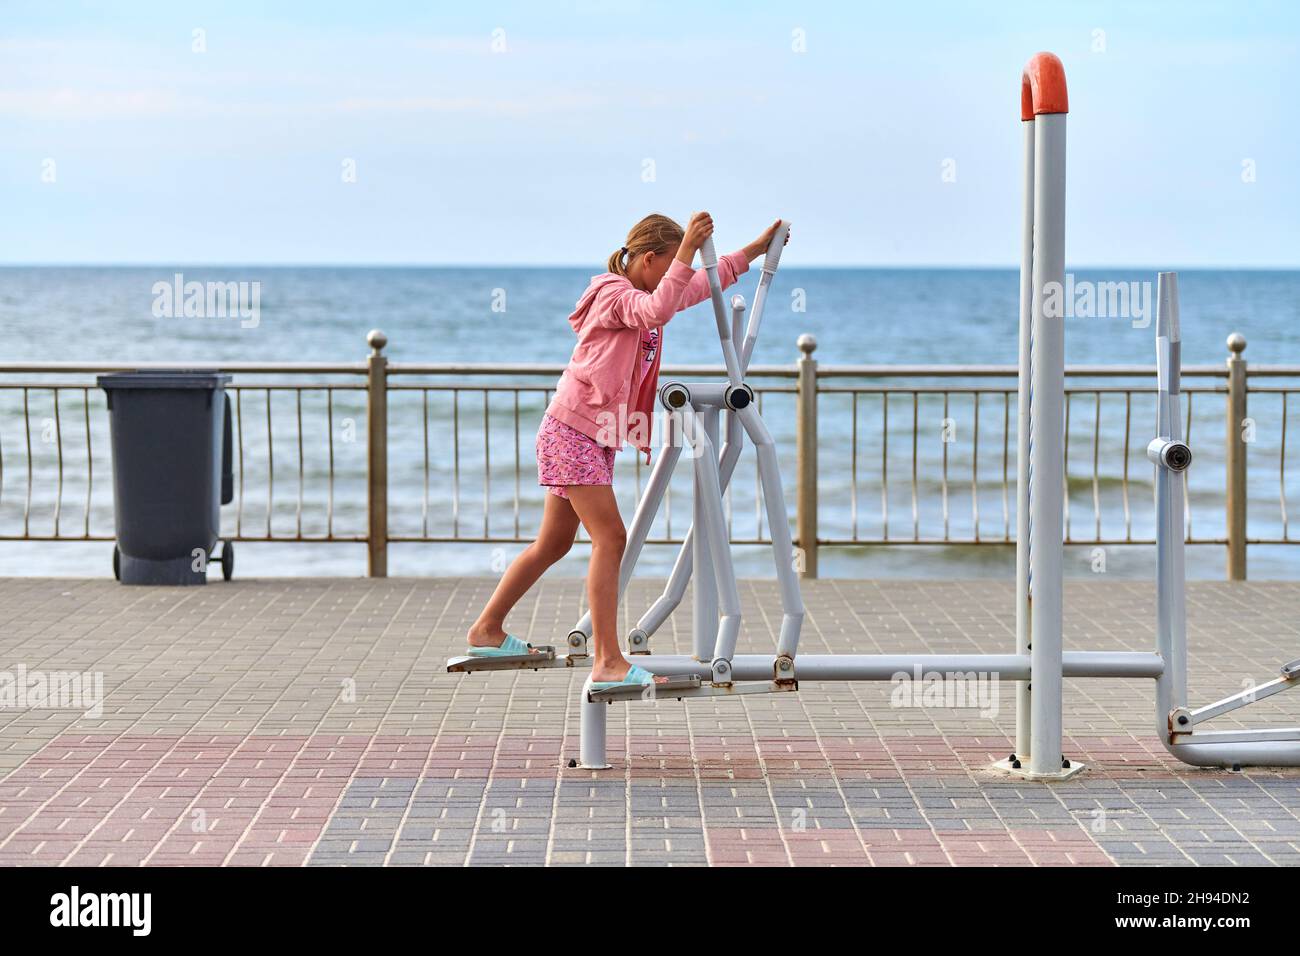 Zelenogradsk, Russia - 07.30.2021 - Young girl in pink clothes using air walker exercise machine, sea background. Girl engaged in fitness, footwork. O Stock Photo